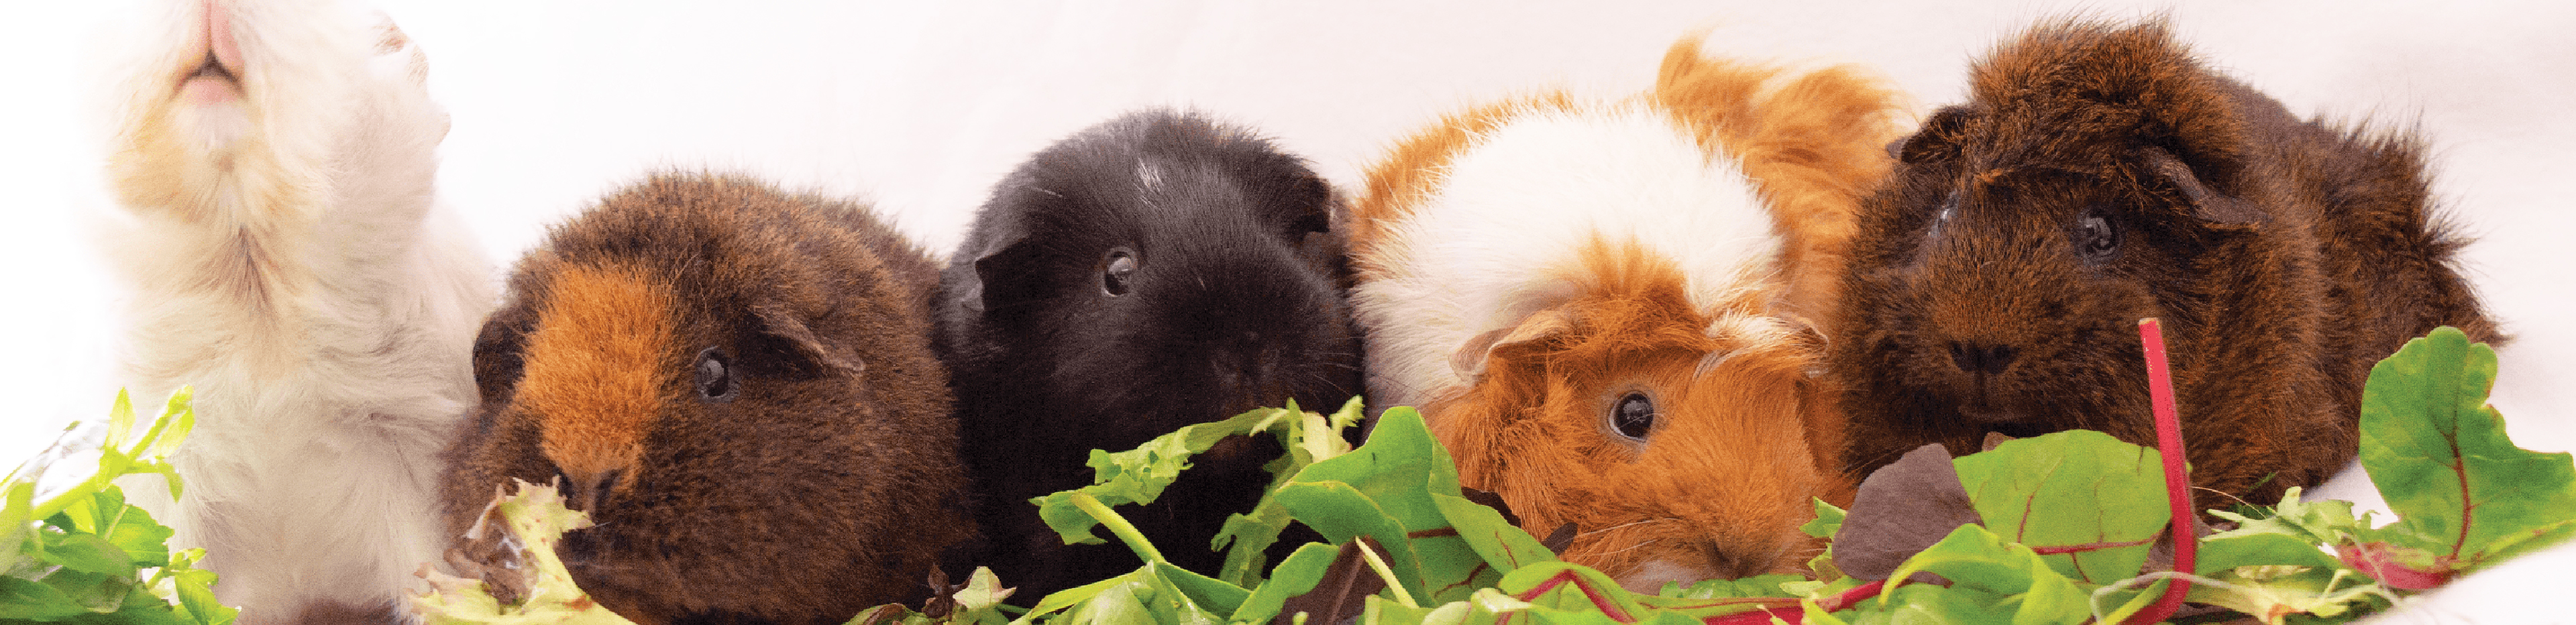 group of five guinea pigs eating lettuce